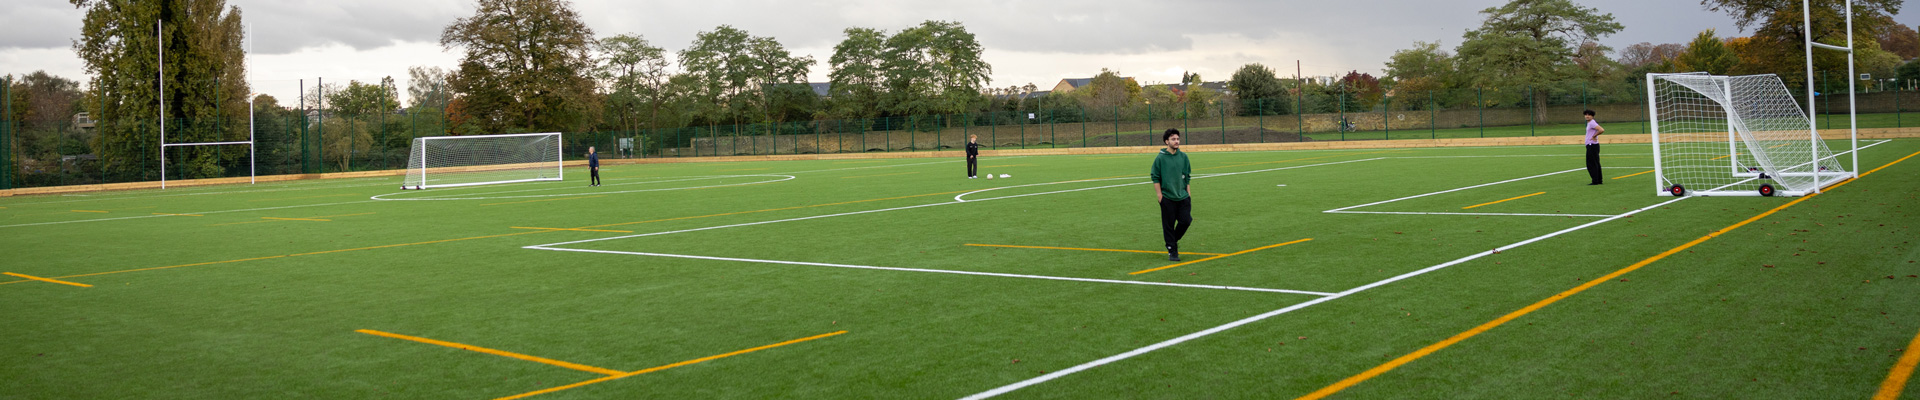 5g all-weather sports field with students playing football